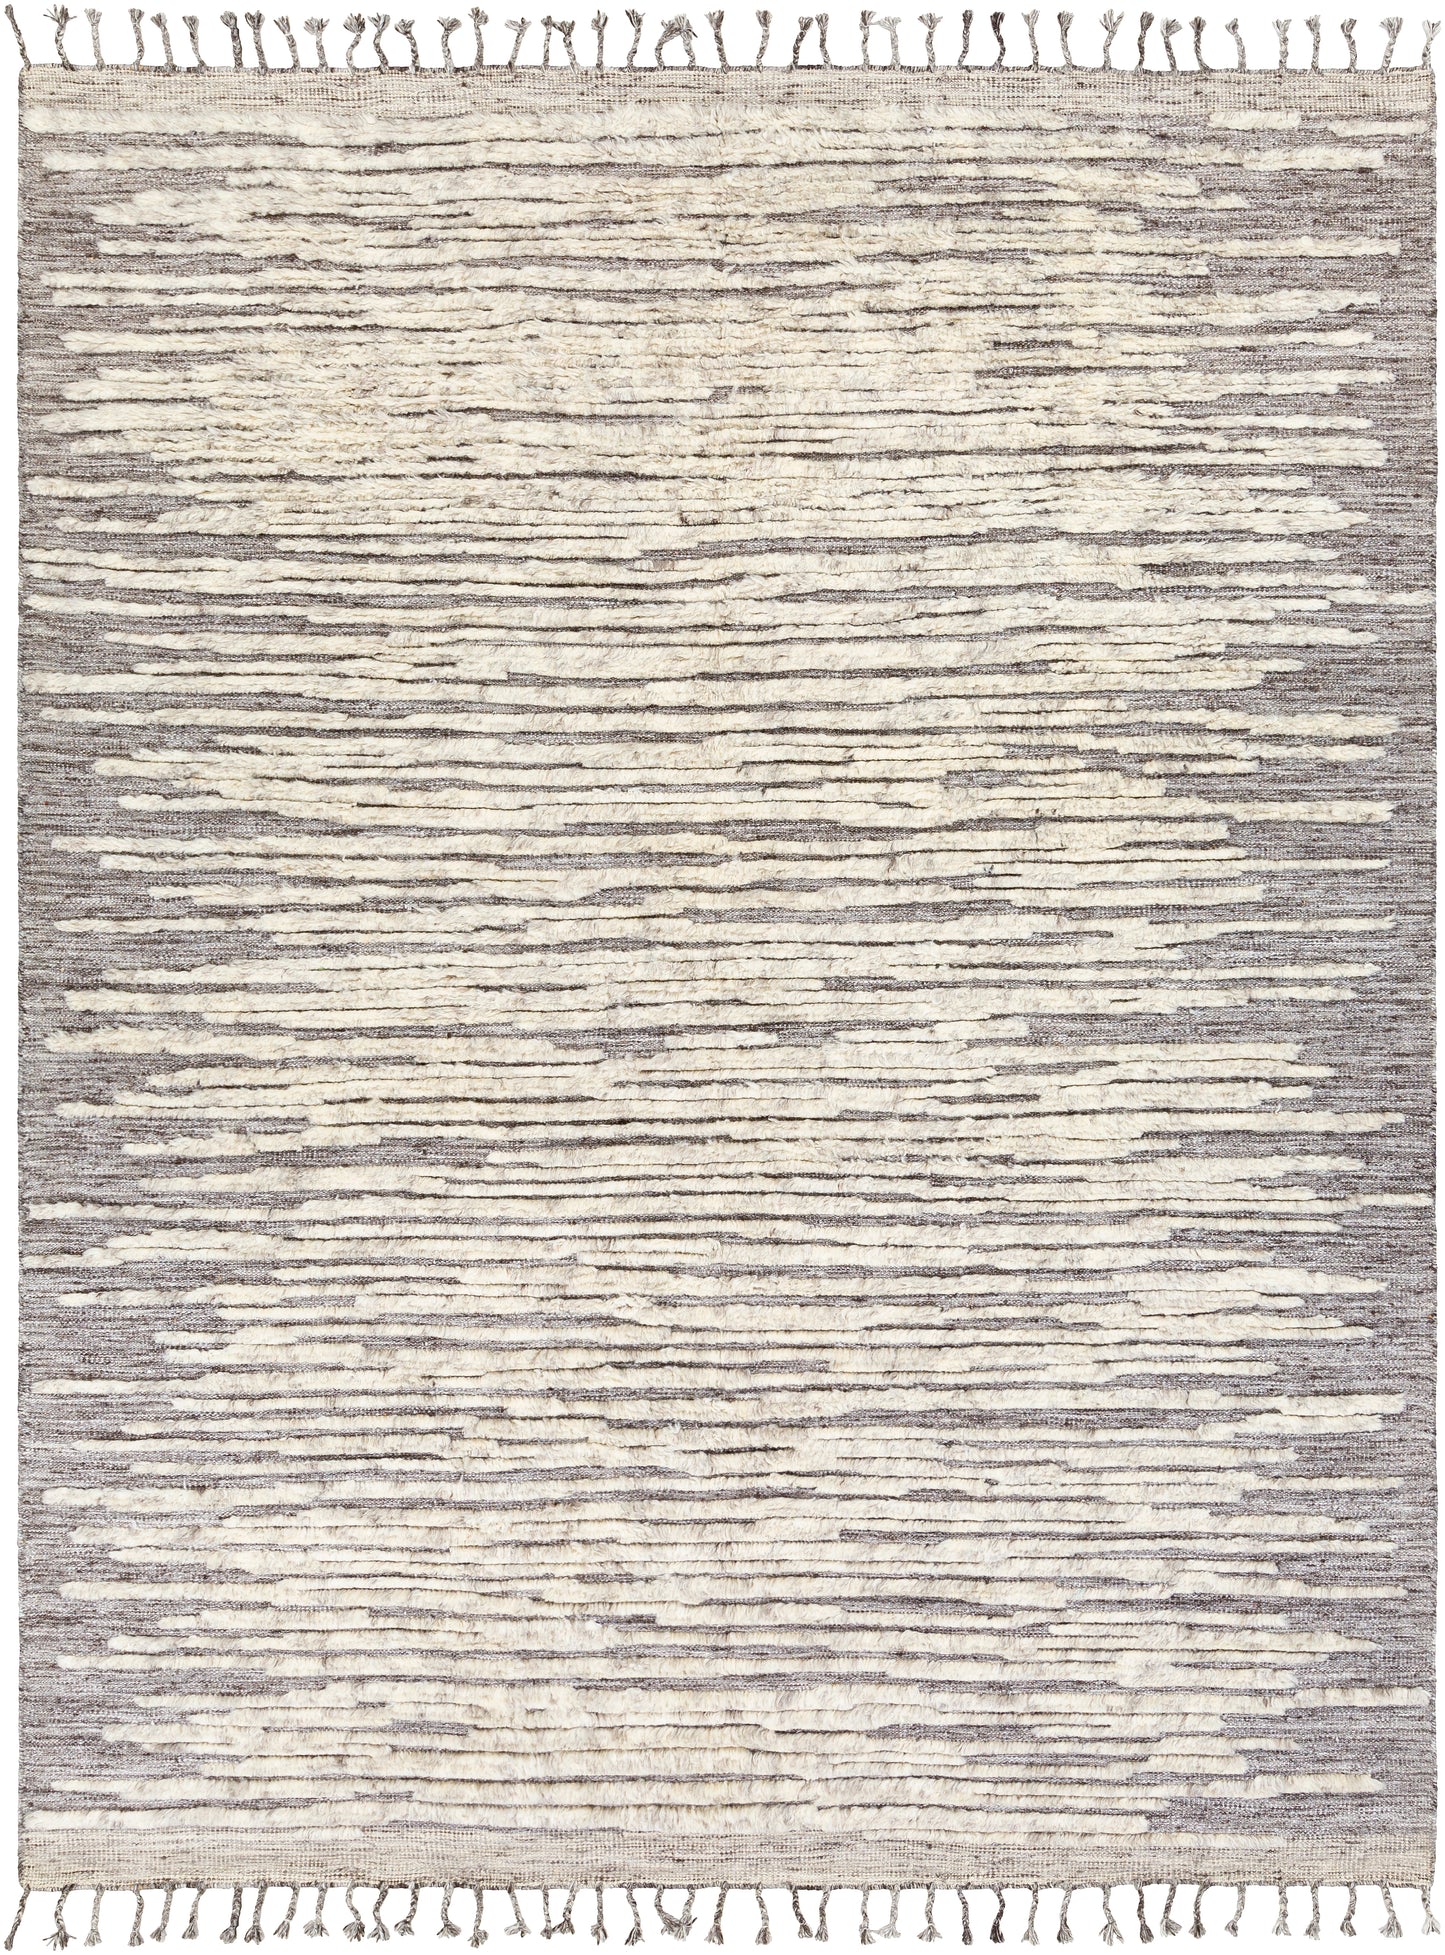 Sahara 25935 Hand Knotted Wool Indoor Area Rug by Surya Rugs